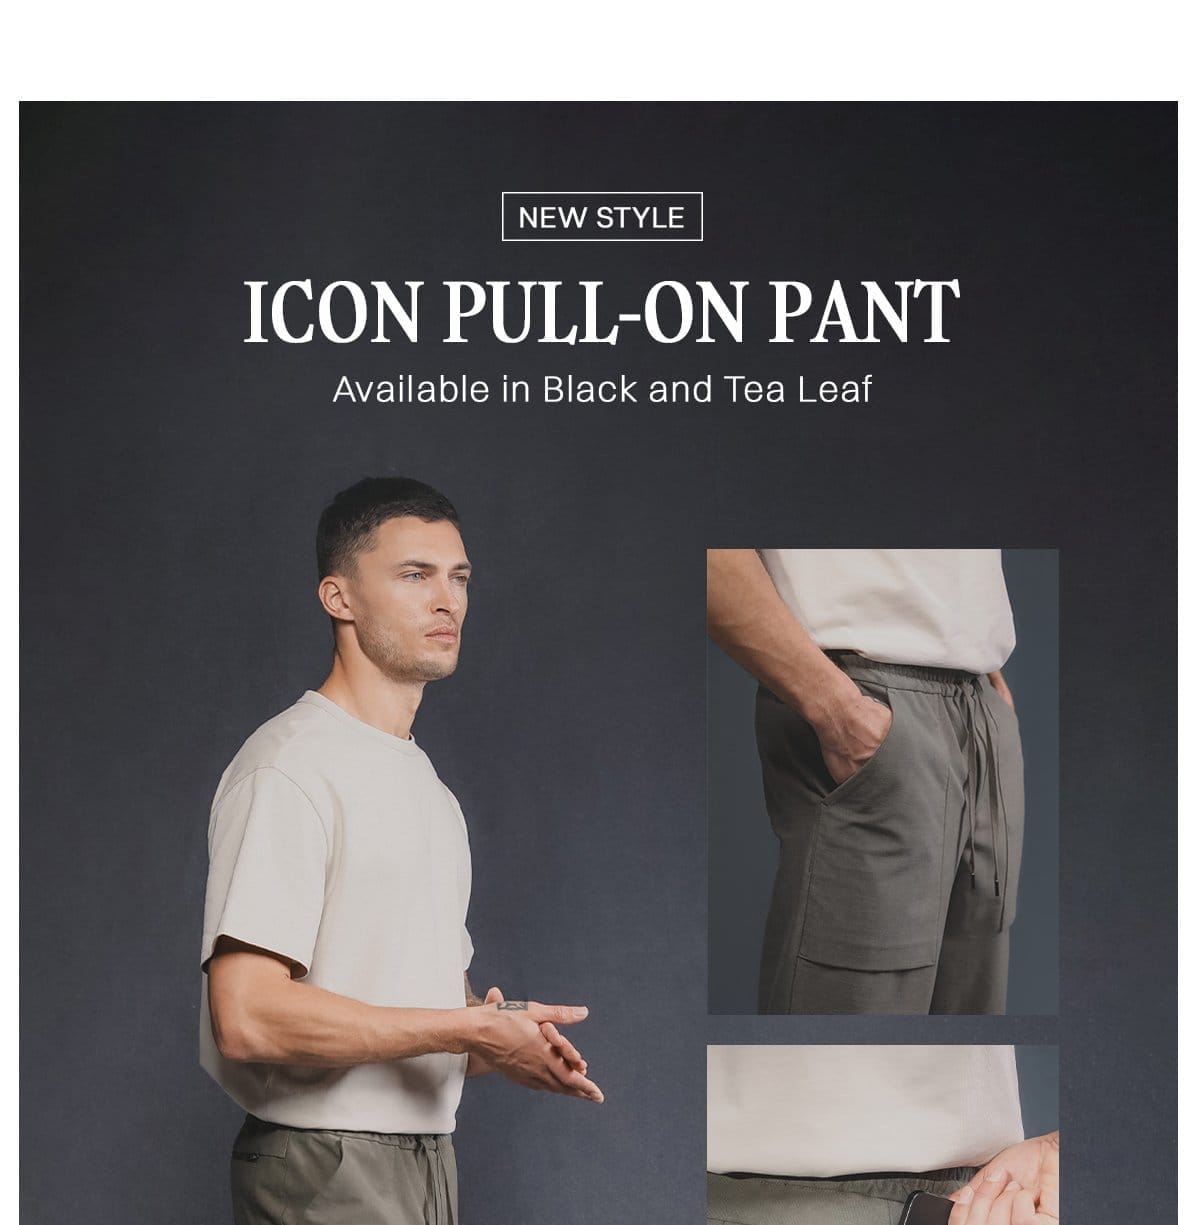 Launch Icon Pull-On Pant